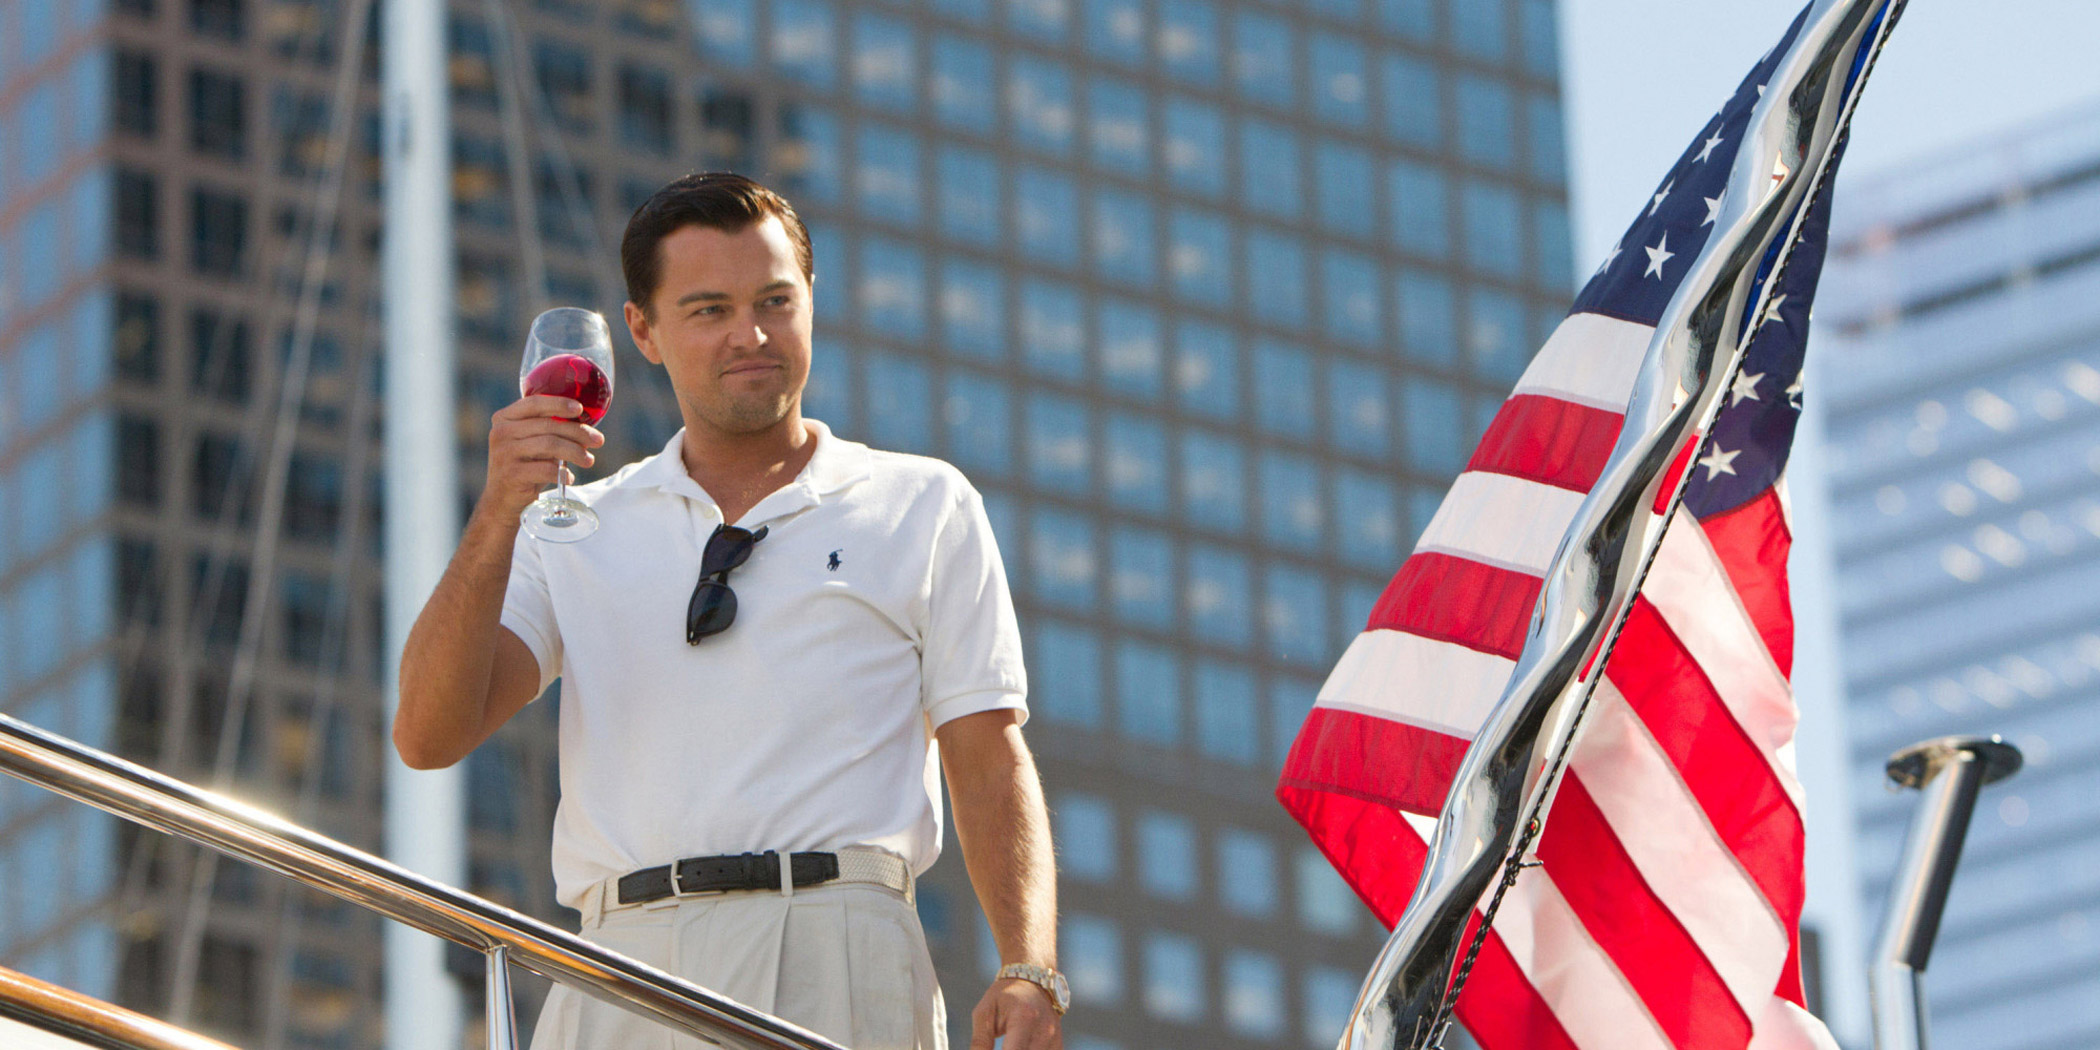 Leonardo Dicaprio wearing a white Ralph Lauren Polo shirt in the 2013 film <i>The Wolf of Wall Street</i>. (Paramount Pictures)